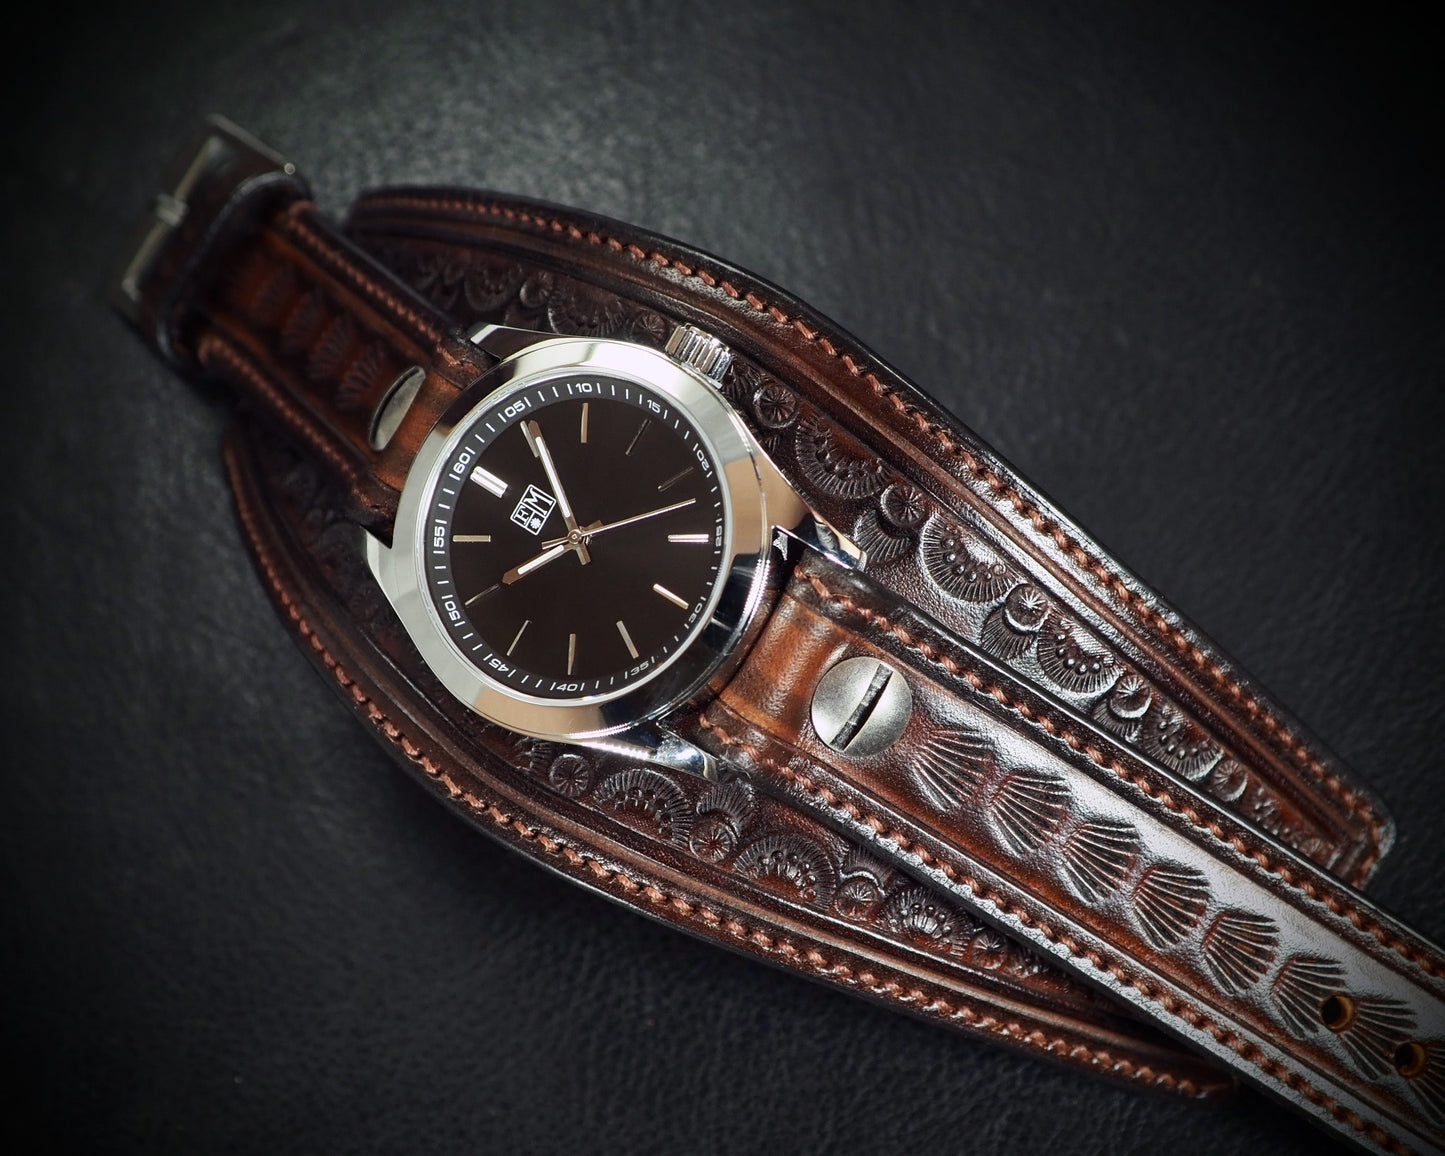 Western hand stamped Leather cuff watch : Rich tones leather watchband. Hand Made In New York